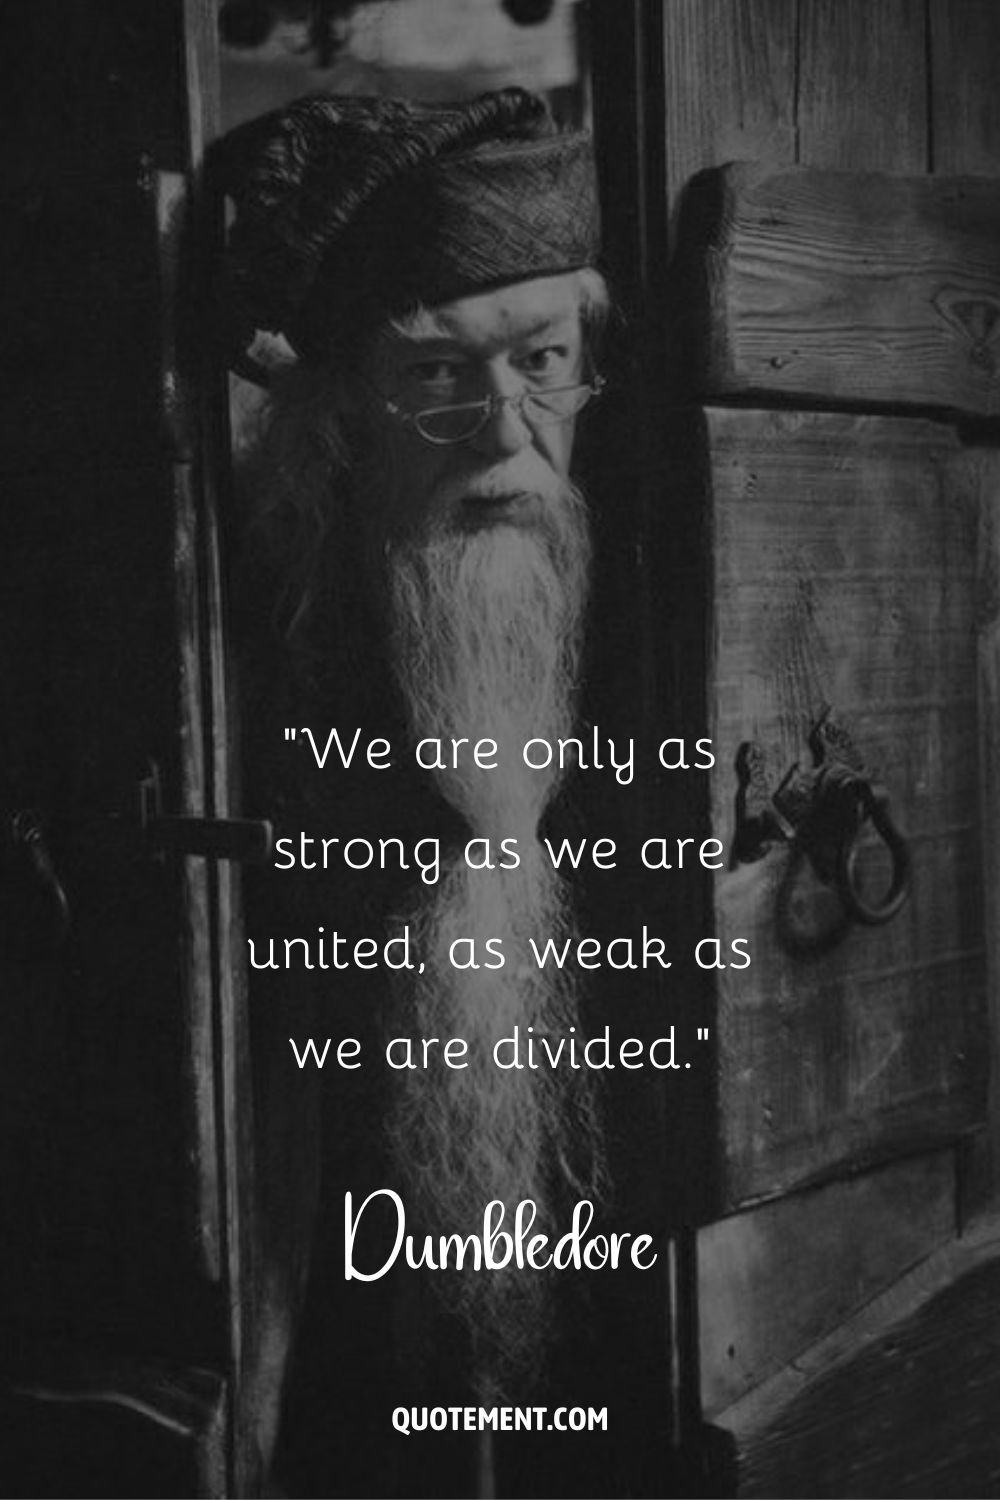 We are only as strong as we are united, as weak as we are divided.